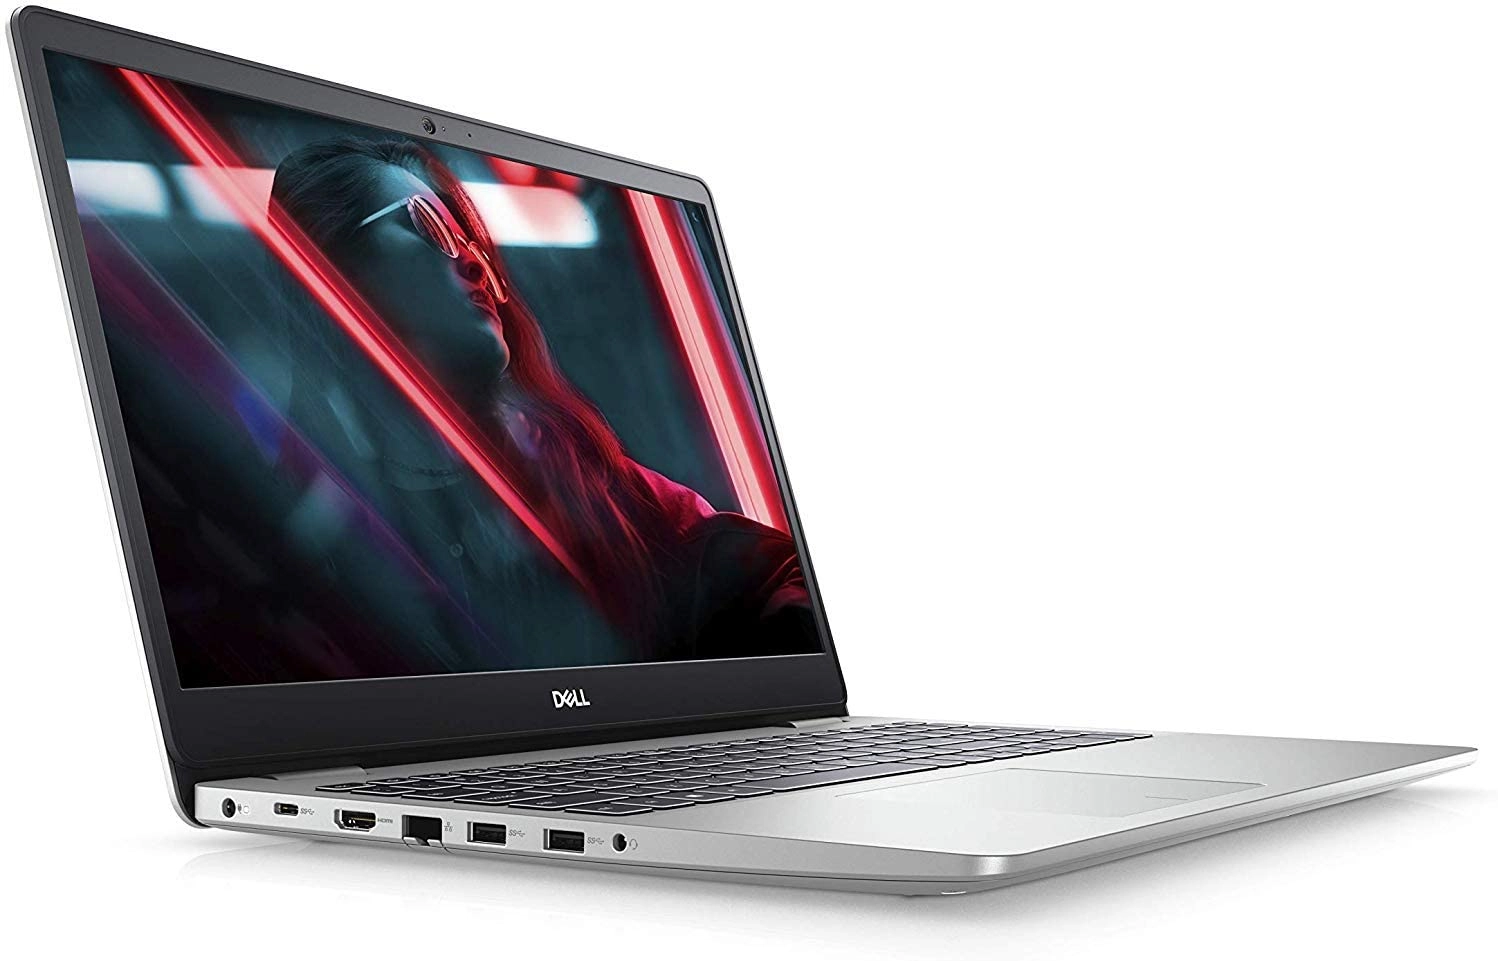 Dell Inspiron 15 laptop image